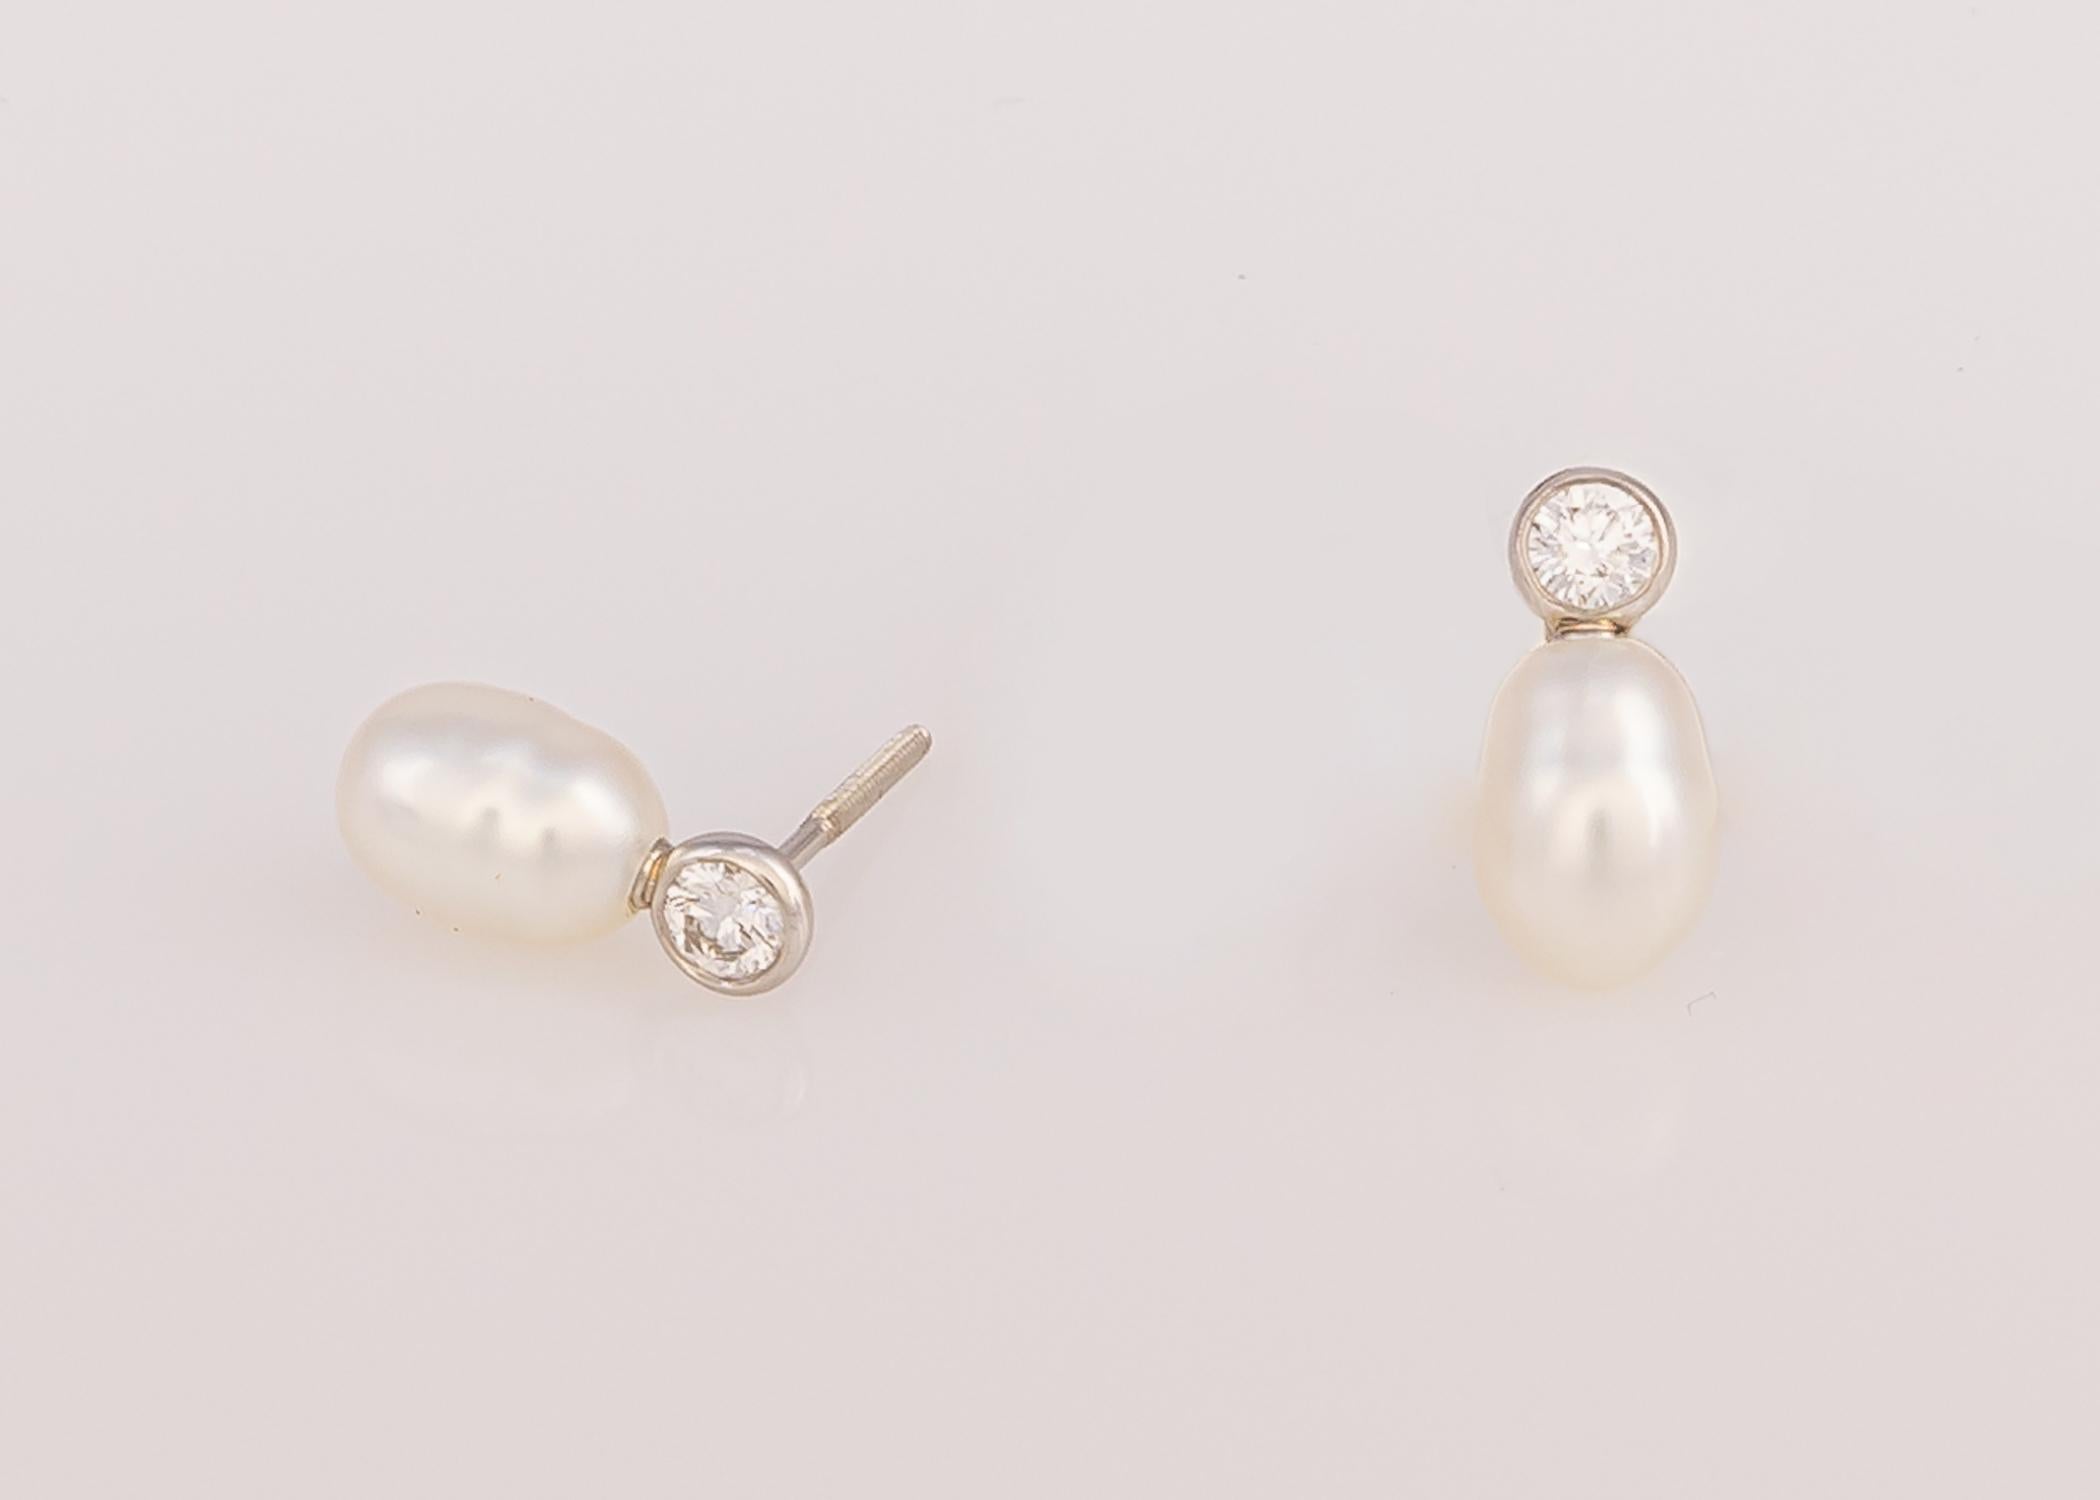 Elsa Peretti designs are iconic and collectable. This pair of earrings feature brilliant cut diamonds .30 carats total weight and a pair of white keshi pearls 9.6 x 6.6 mm in size all set in platinum with pierced screw backs. Just over 1/2 in in